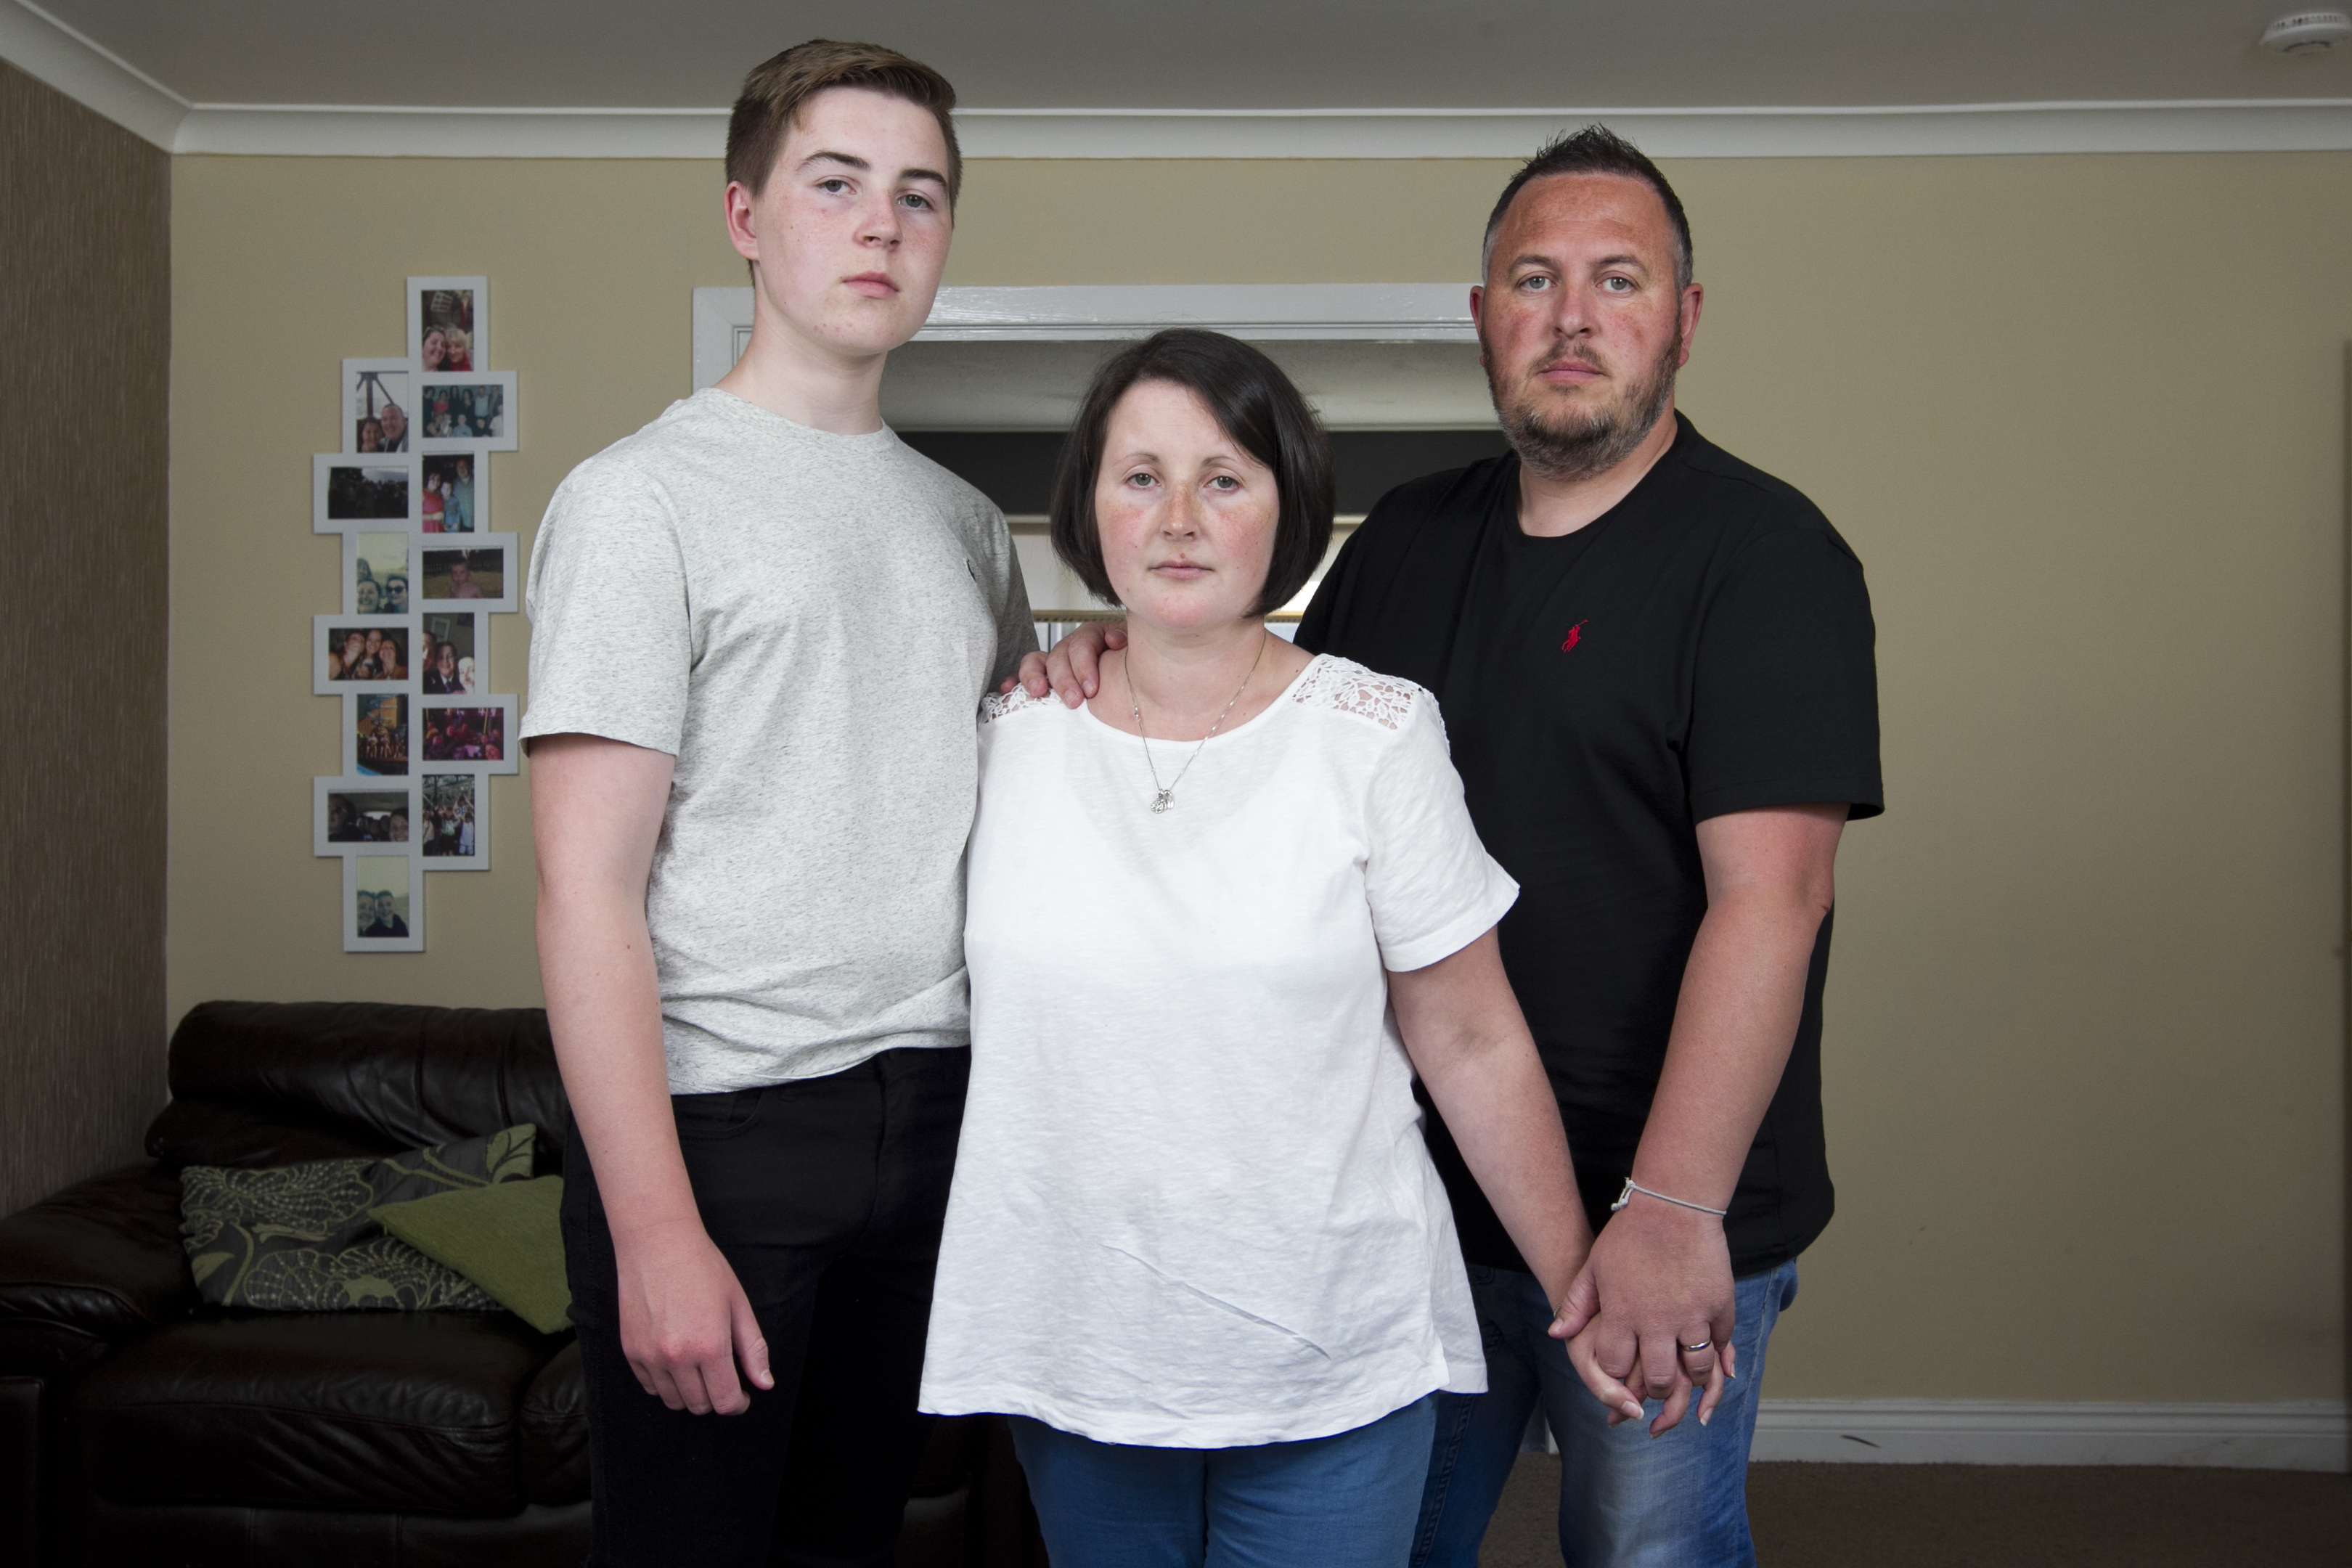 Caroline Burns, with her family. Caroline has been taking Cannabis oil, to help treat her barin tumour but worries legal type might not be the right one for her. (Andrew Cawley)